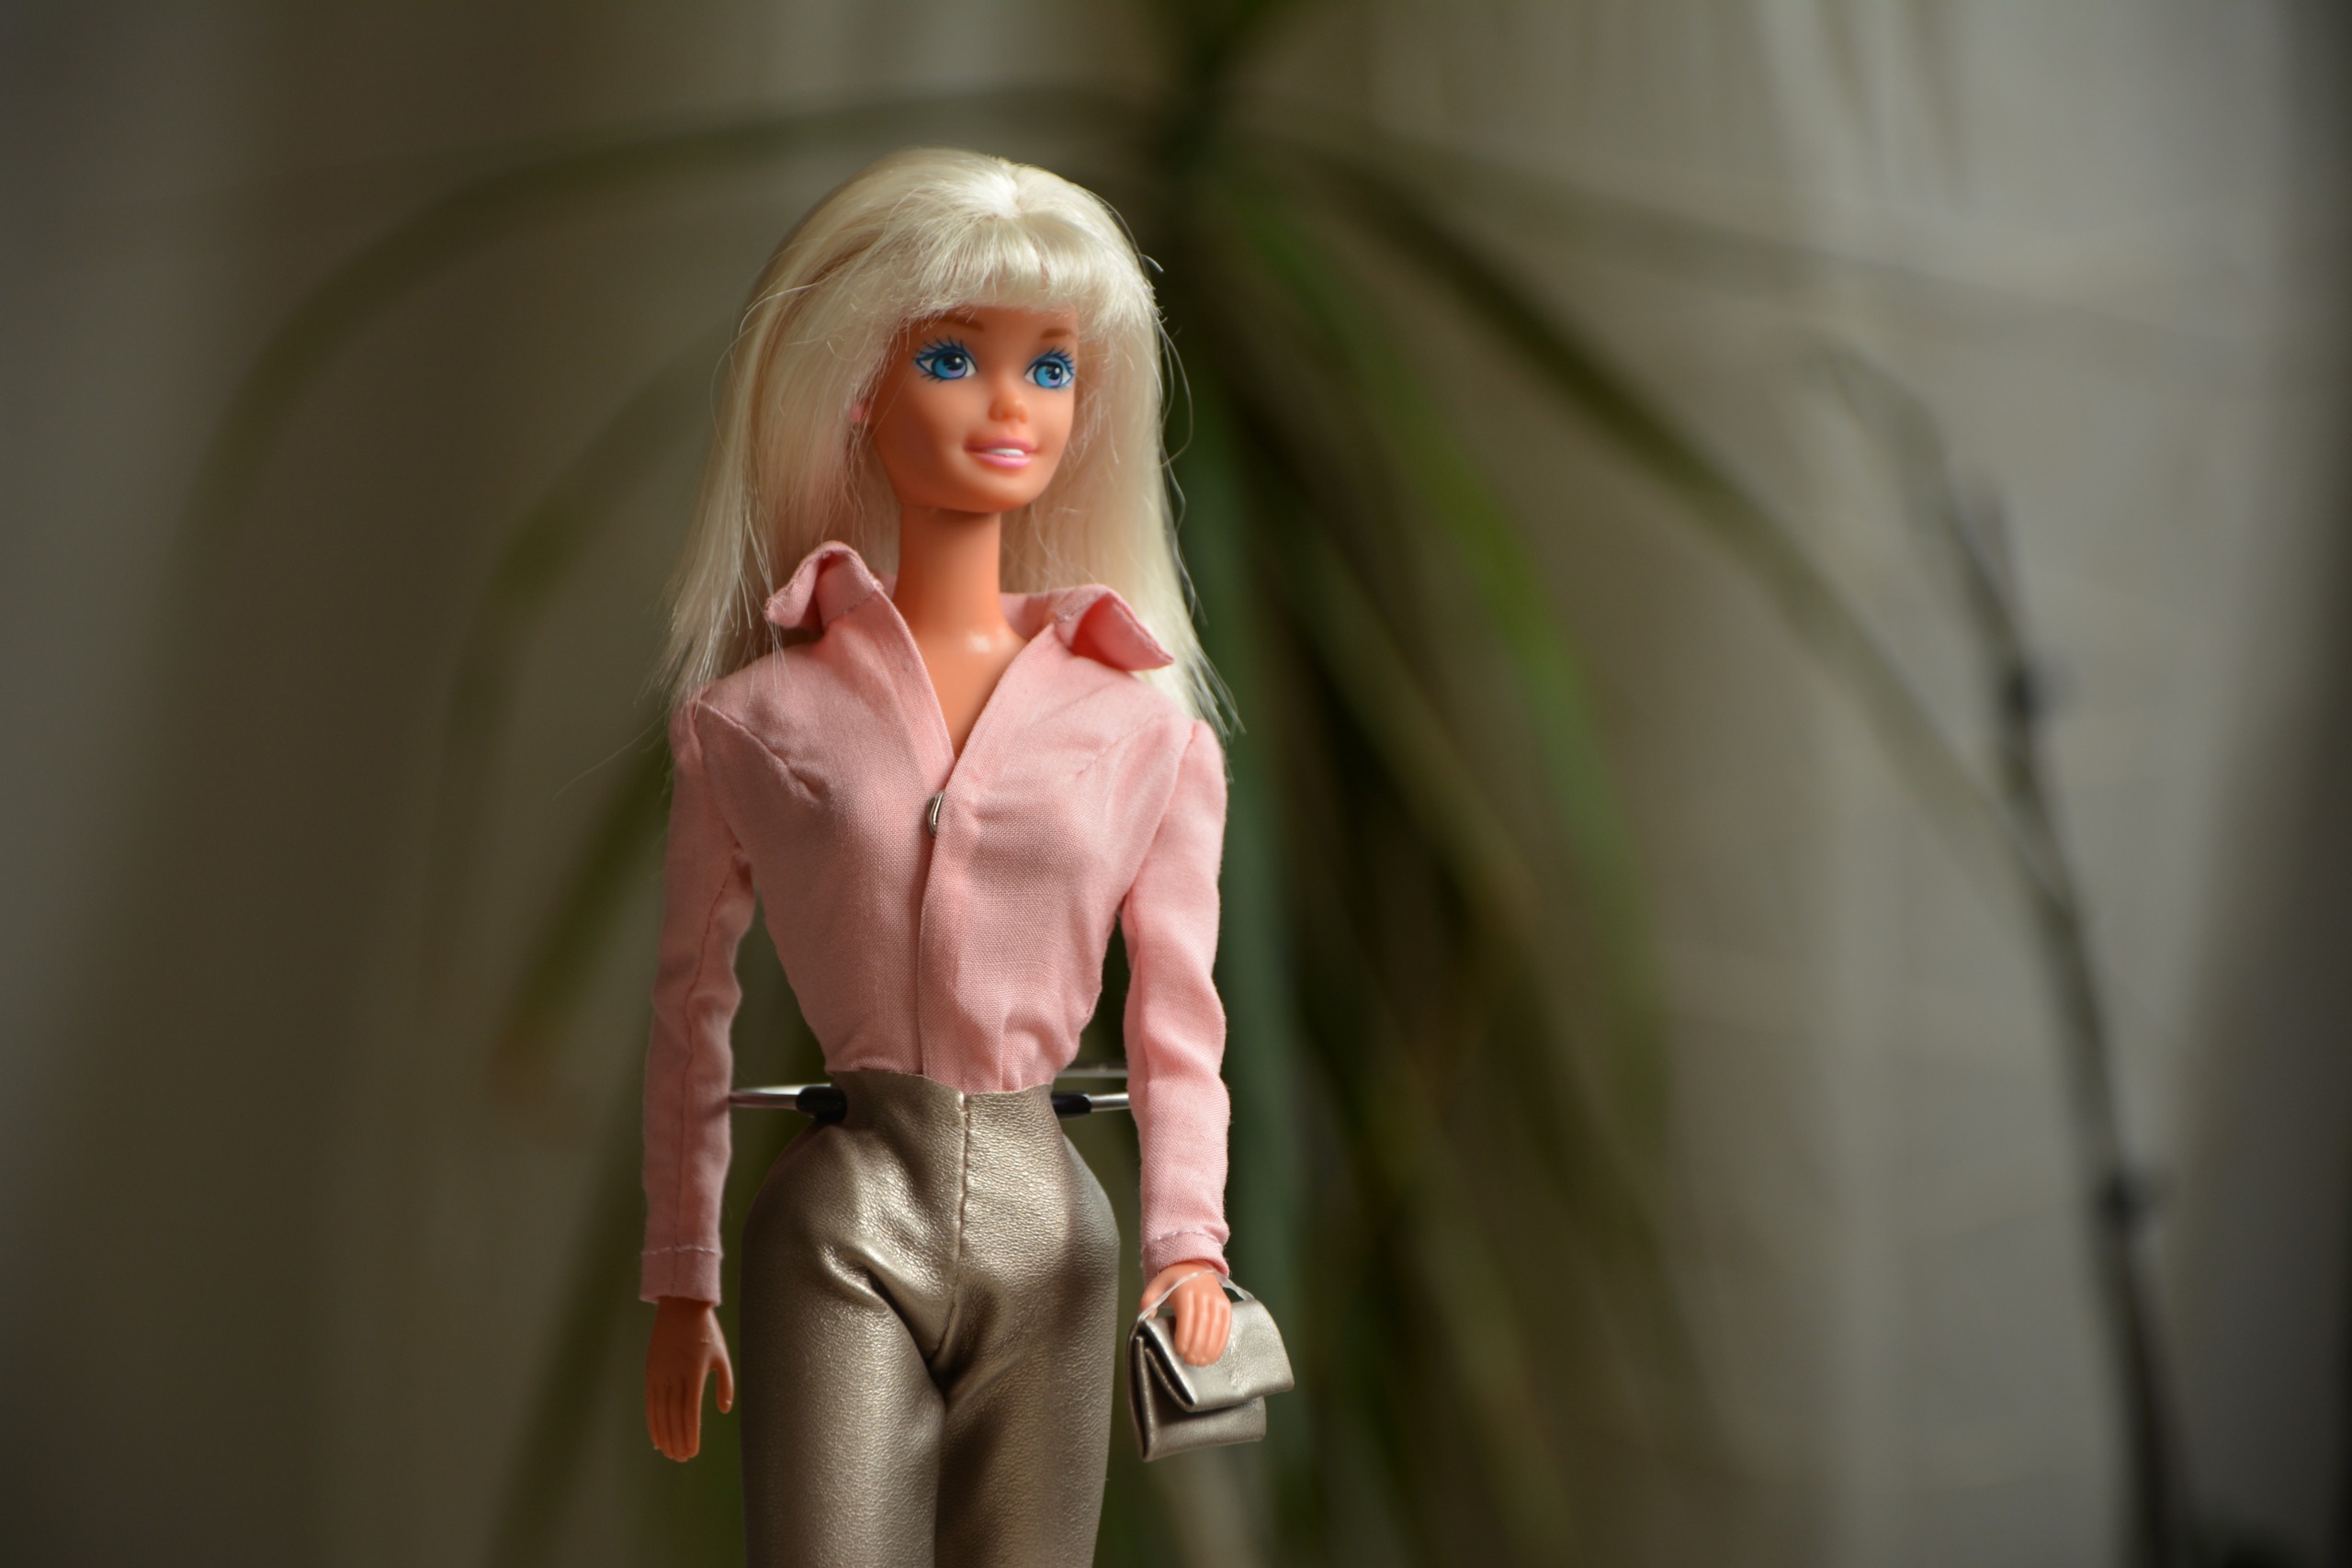 Barbie doll collectors: 'There's another package at the door